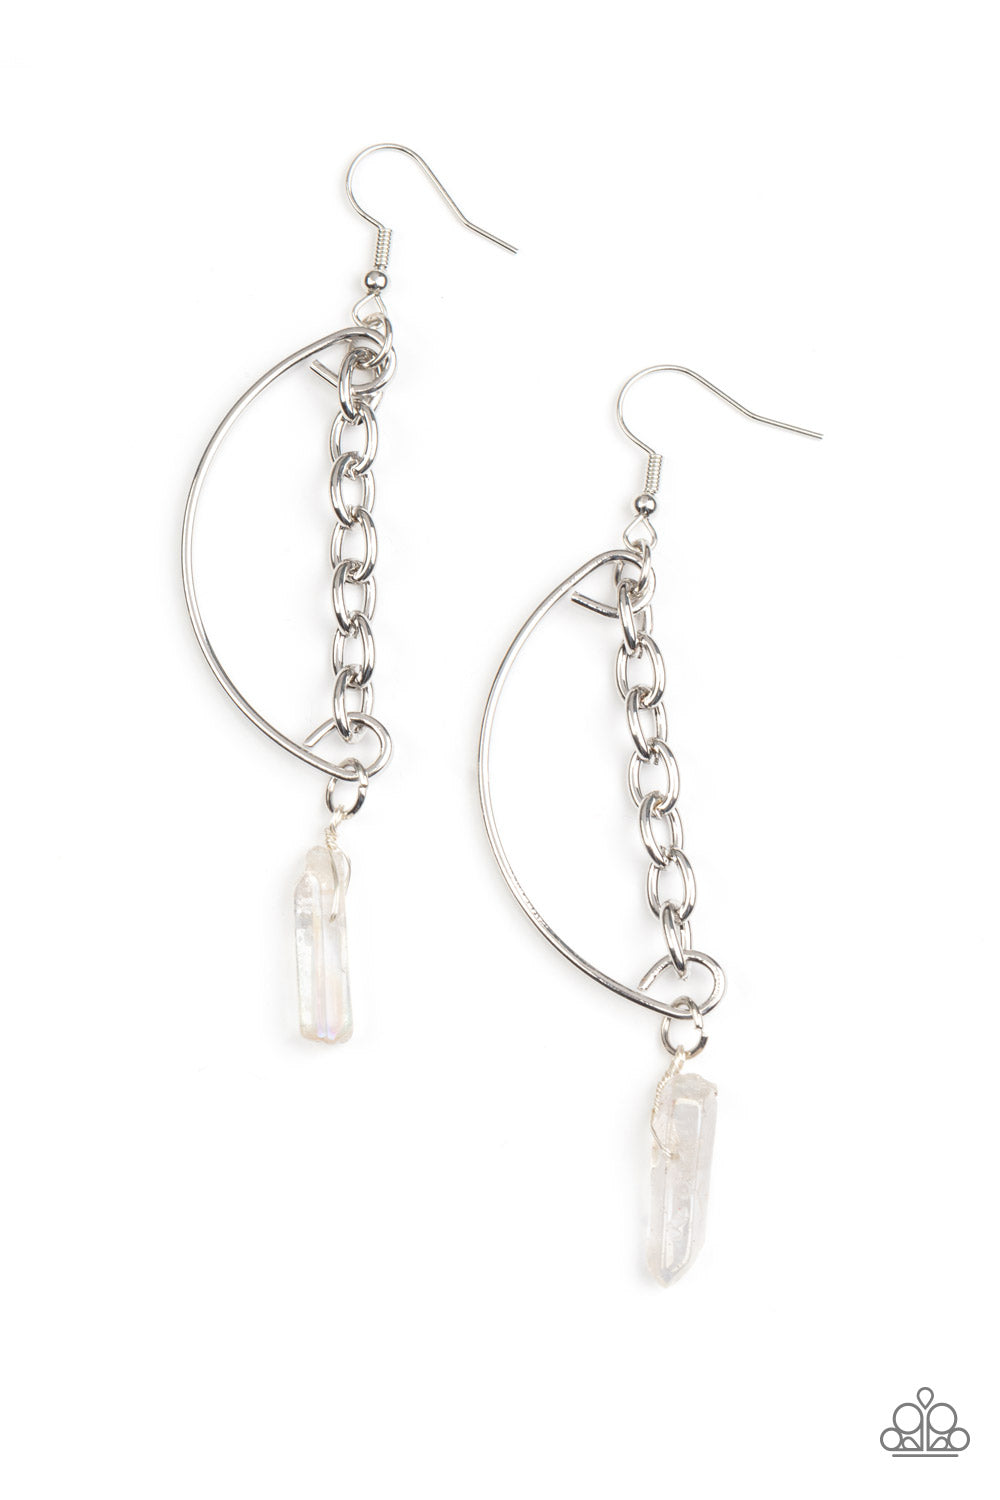 Yin to My Yang White Earring - Paparazzi Accessories  Featuring an iridescent finish, a glassy crystal-like bead swings from the bottom of a solitaire silver chain that attaches to a bowing silver bar for an edgy look. Earring attaches to a standard fishhook fitting. As the stone elements in this piece are natural, some color variation is normal.  Sold as one pair of earrings.